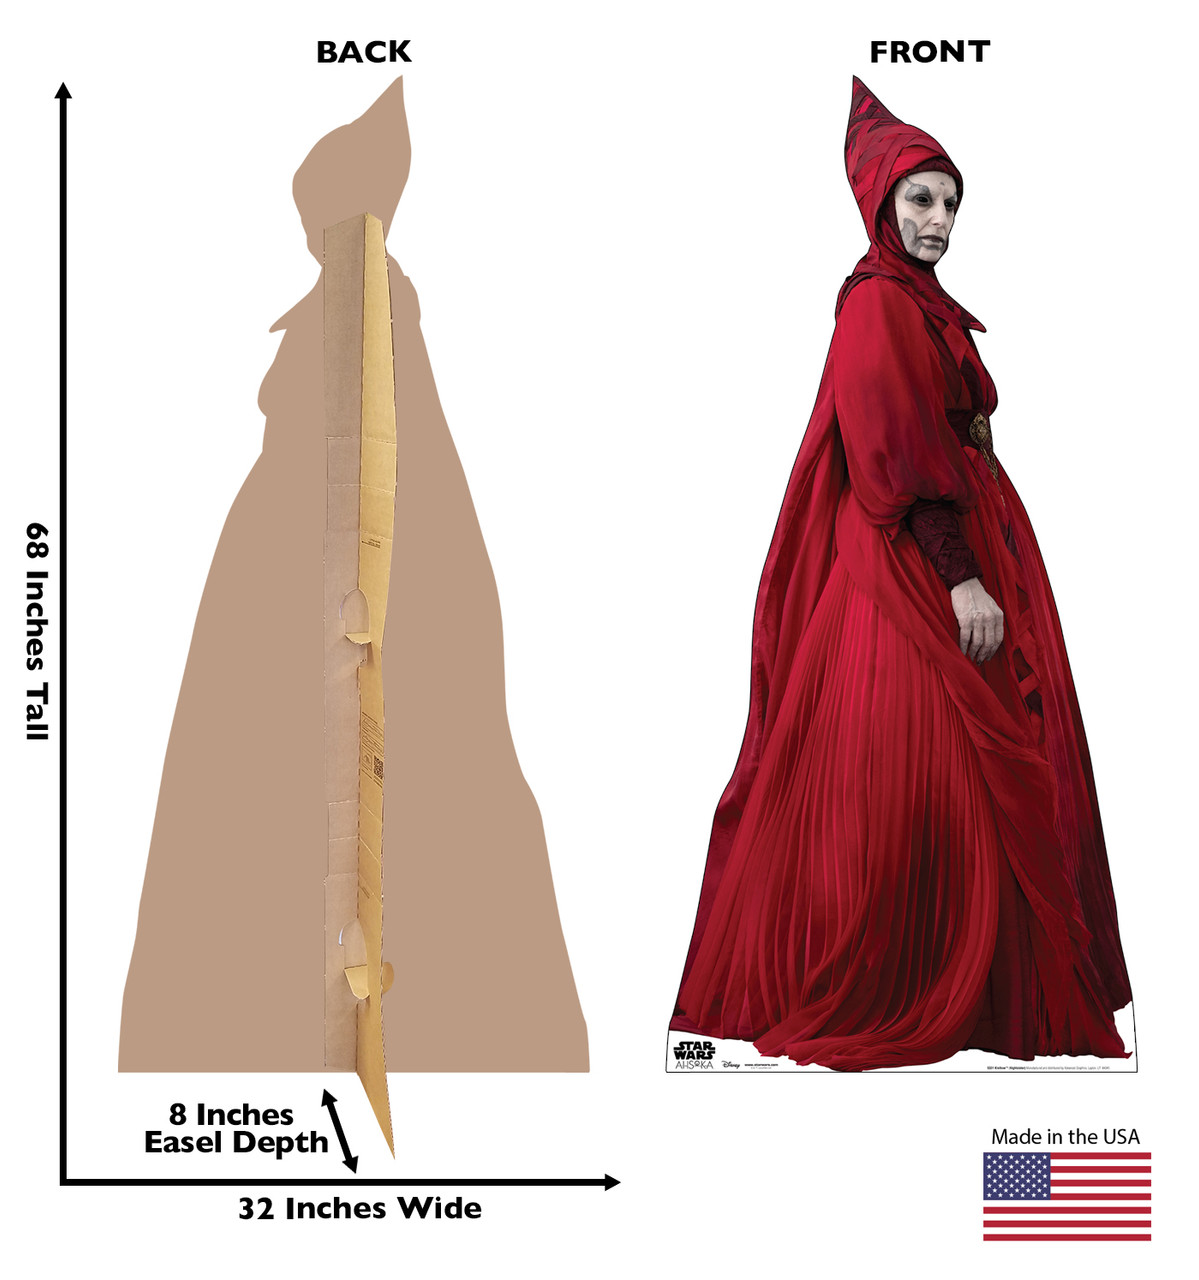 Life-size cardboard standee of Klothow (Nightsister) with back and front dimensions.